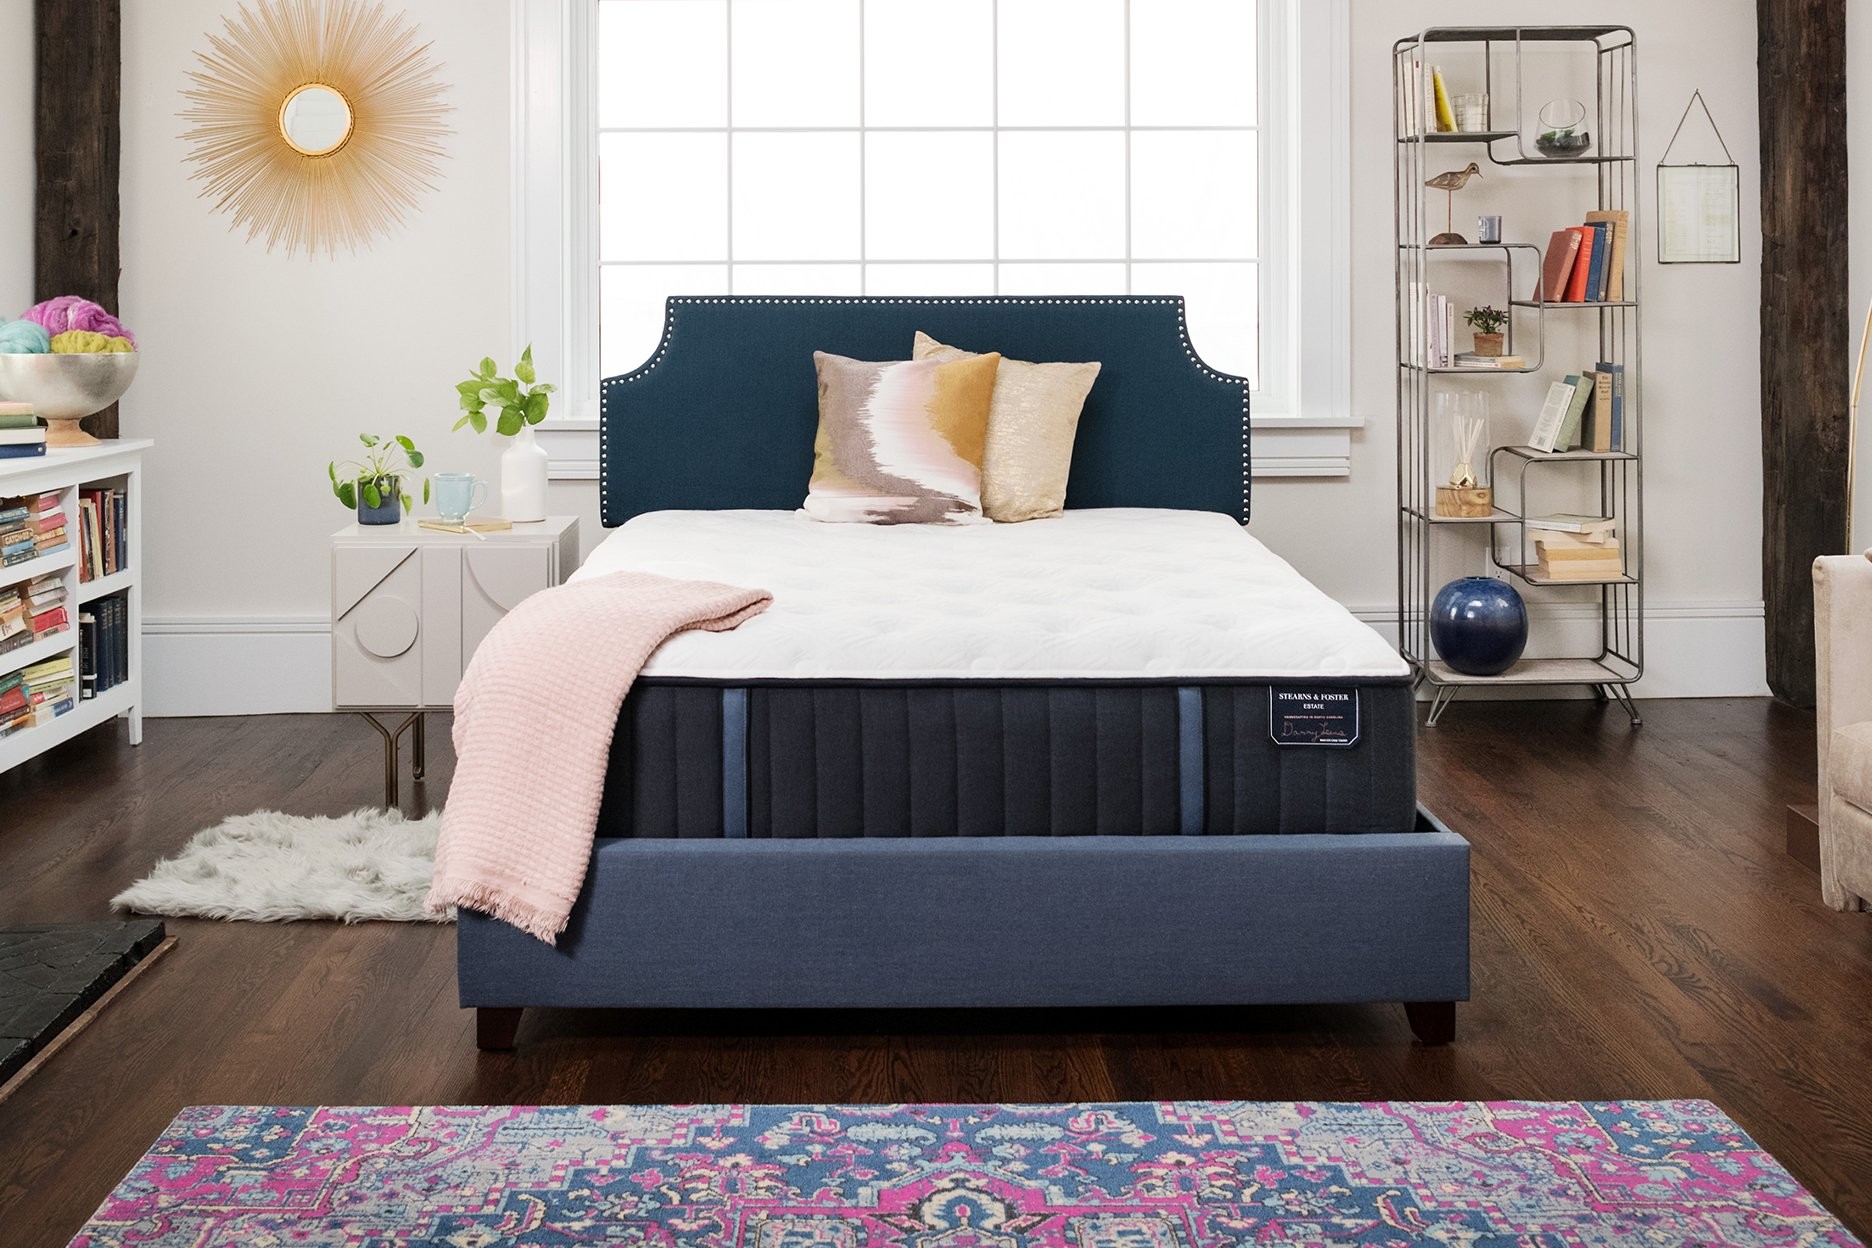 sterns and foster king lakelet hybrid mattress set